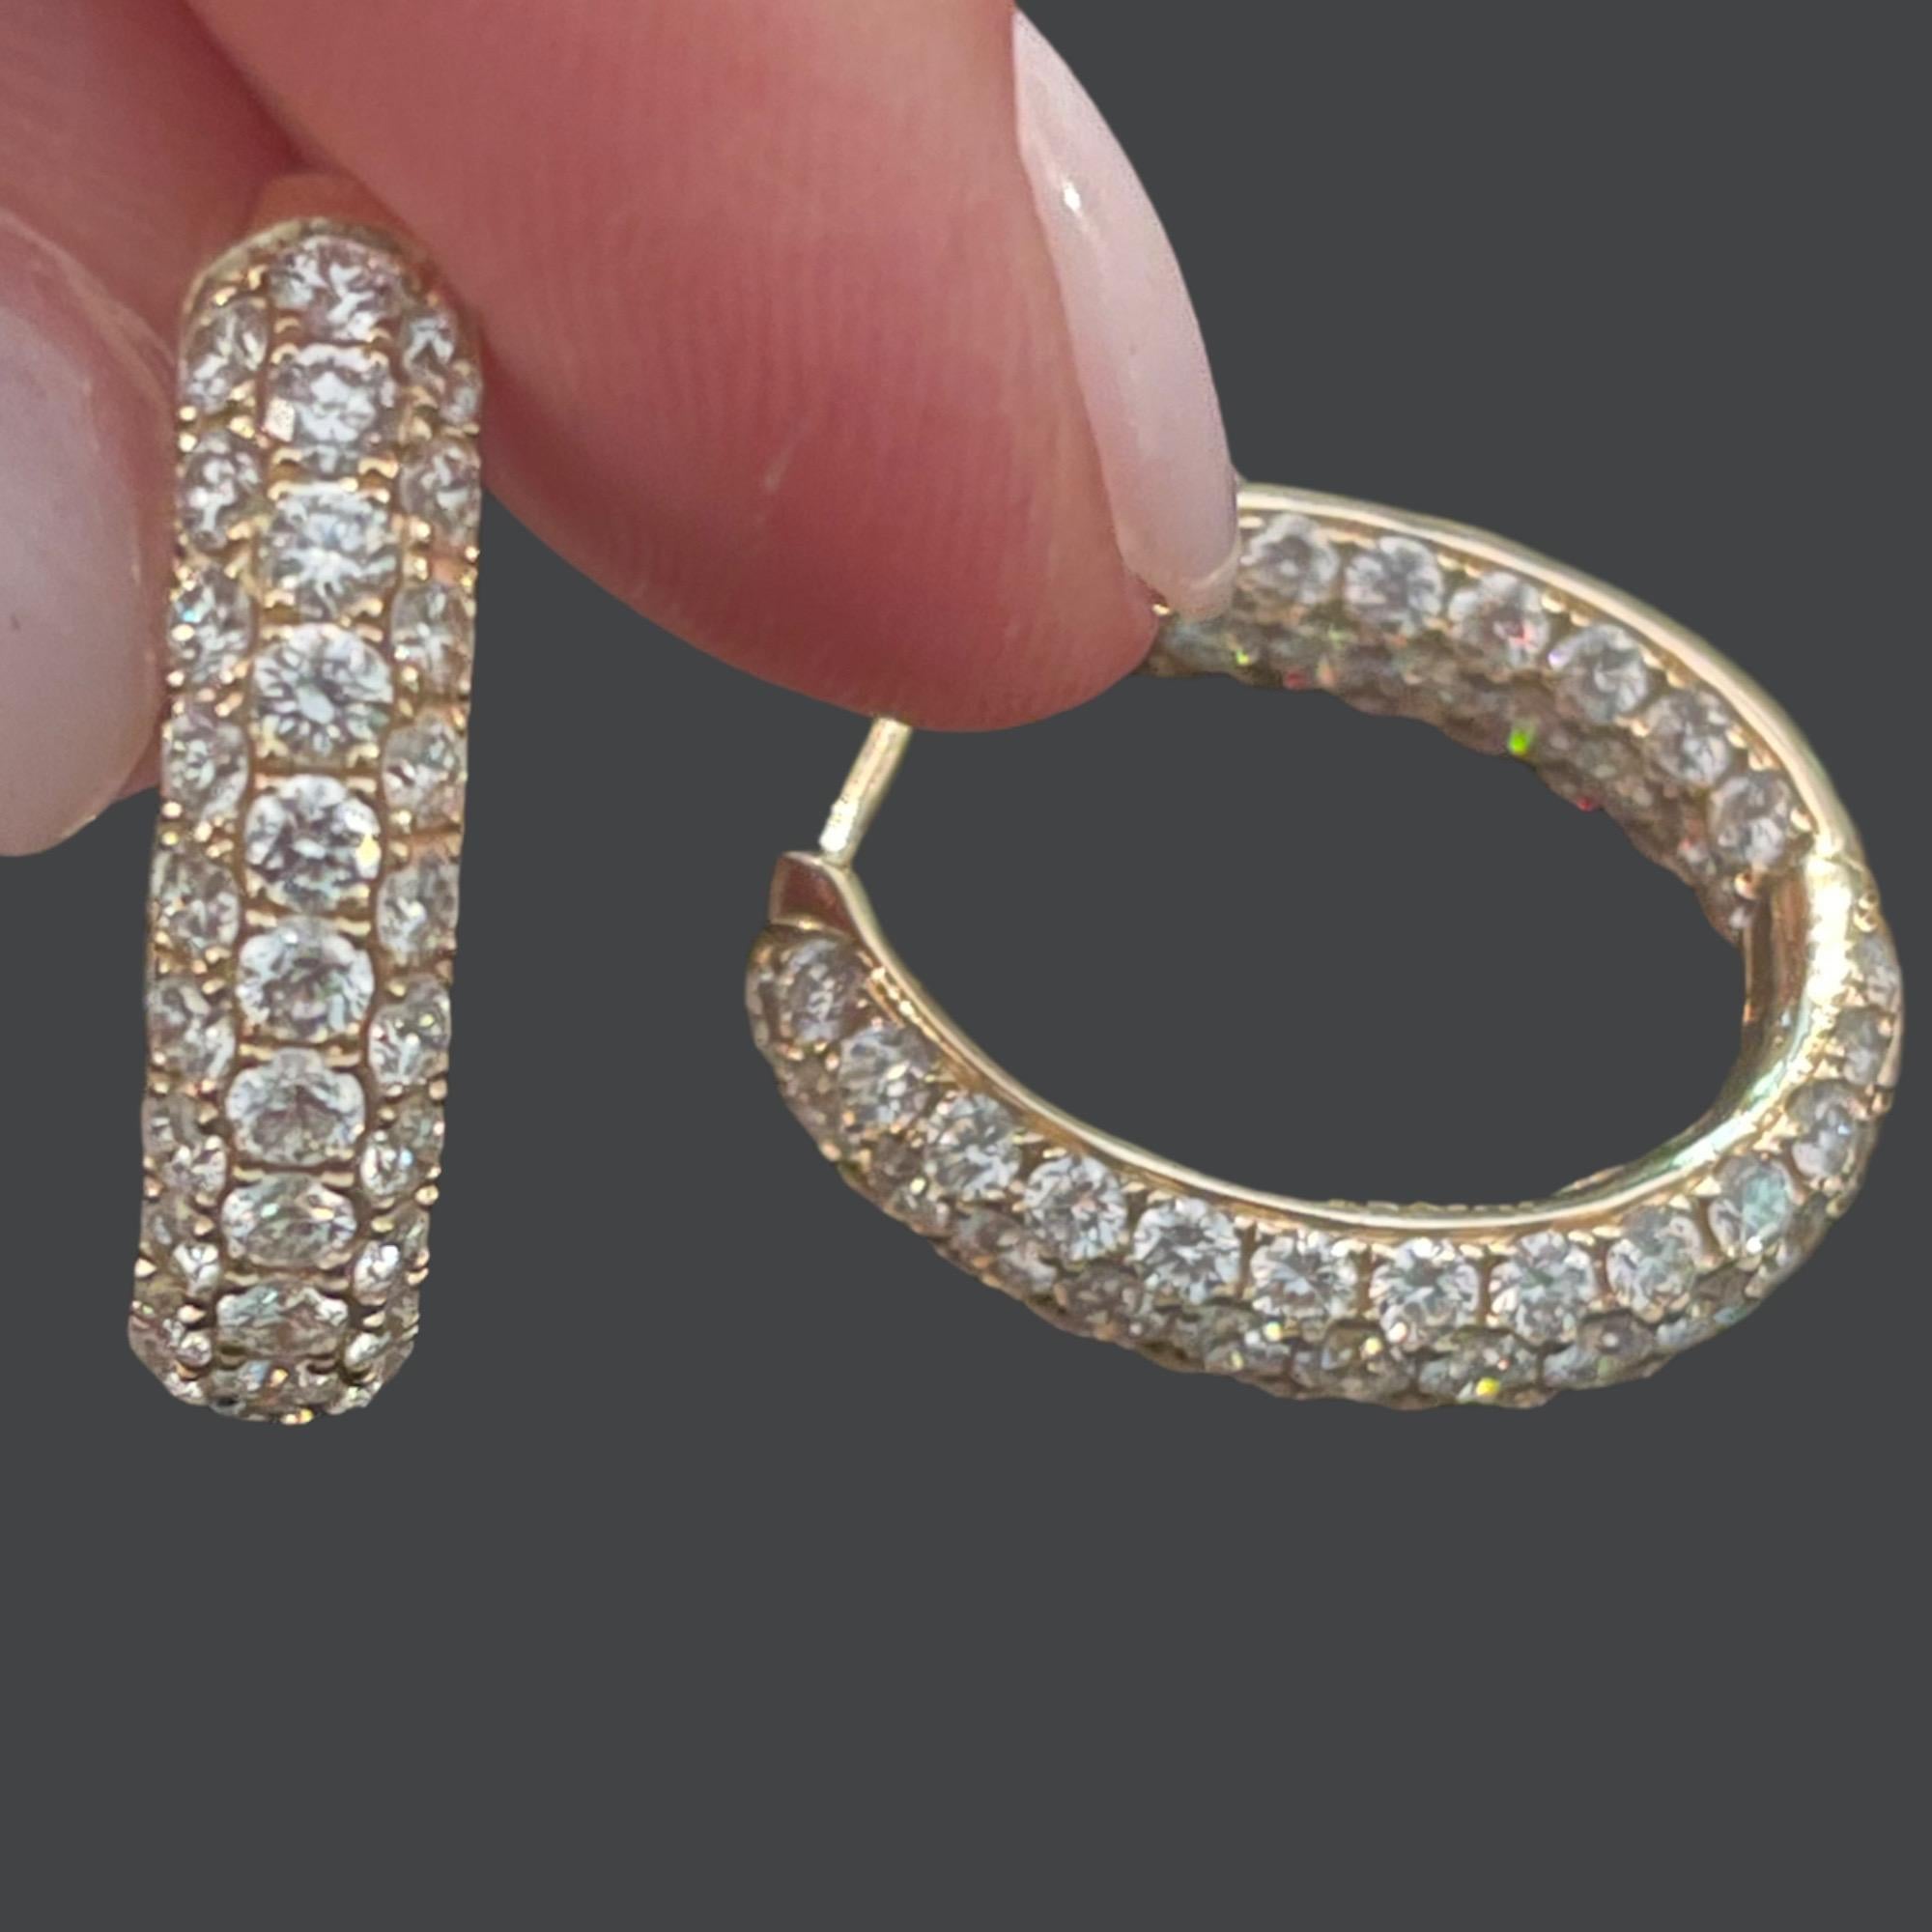 The perfect earring for day or night. These classic yellow gold diamond pave inside out hoops and just the right amount of sparkle to any outfit. With easy but secure closures that make them a breeze to put on and stay on. These earrings have a